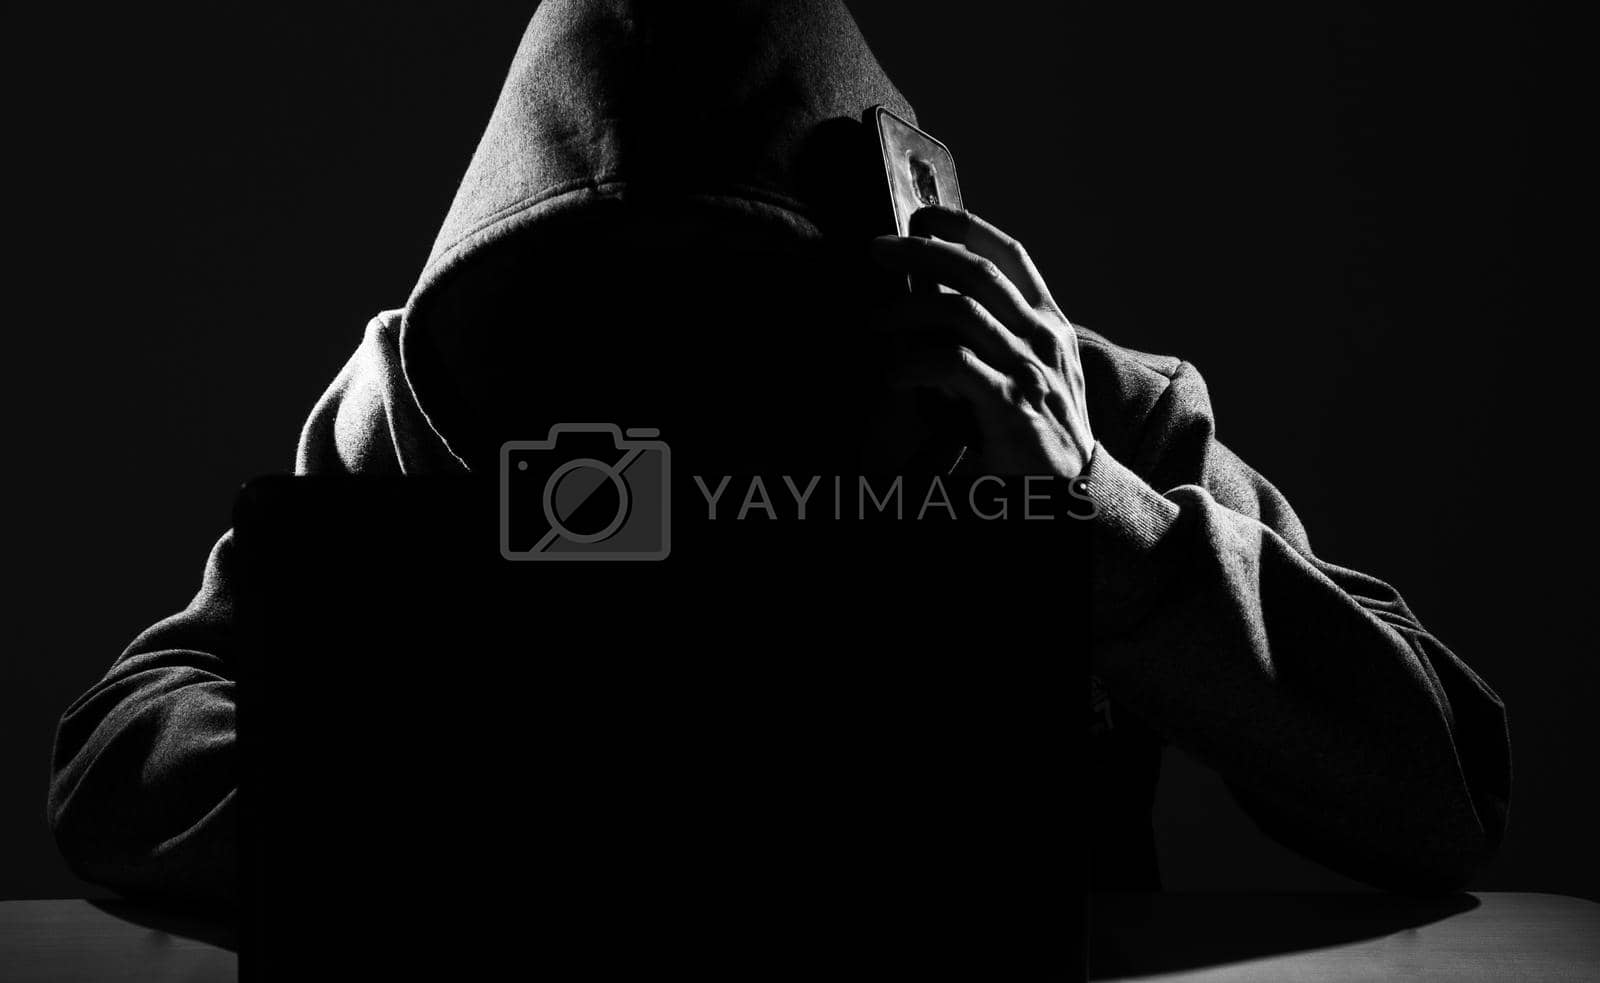 Royalty free image of Hacker Using Smartphone. Men in black clothes with hidden face. by tehcheesiong